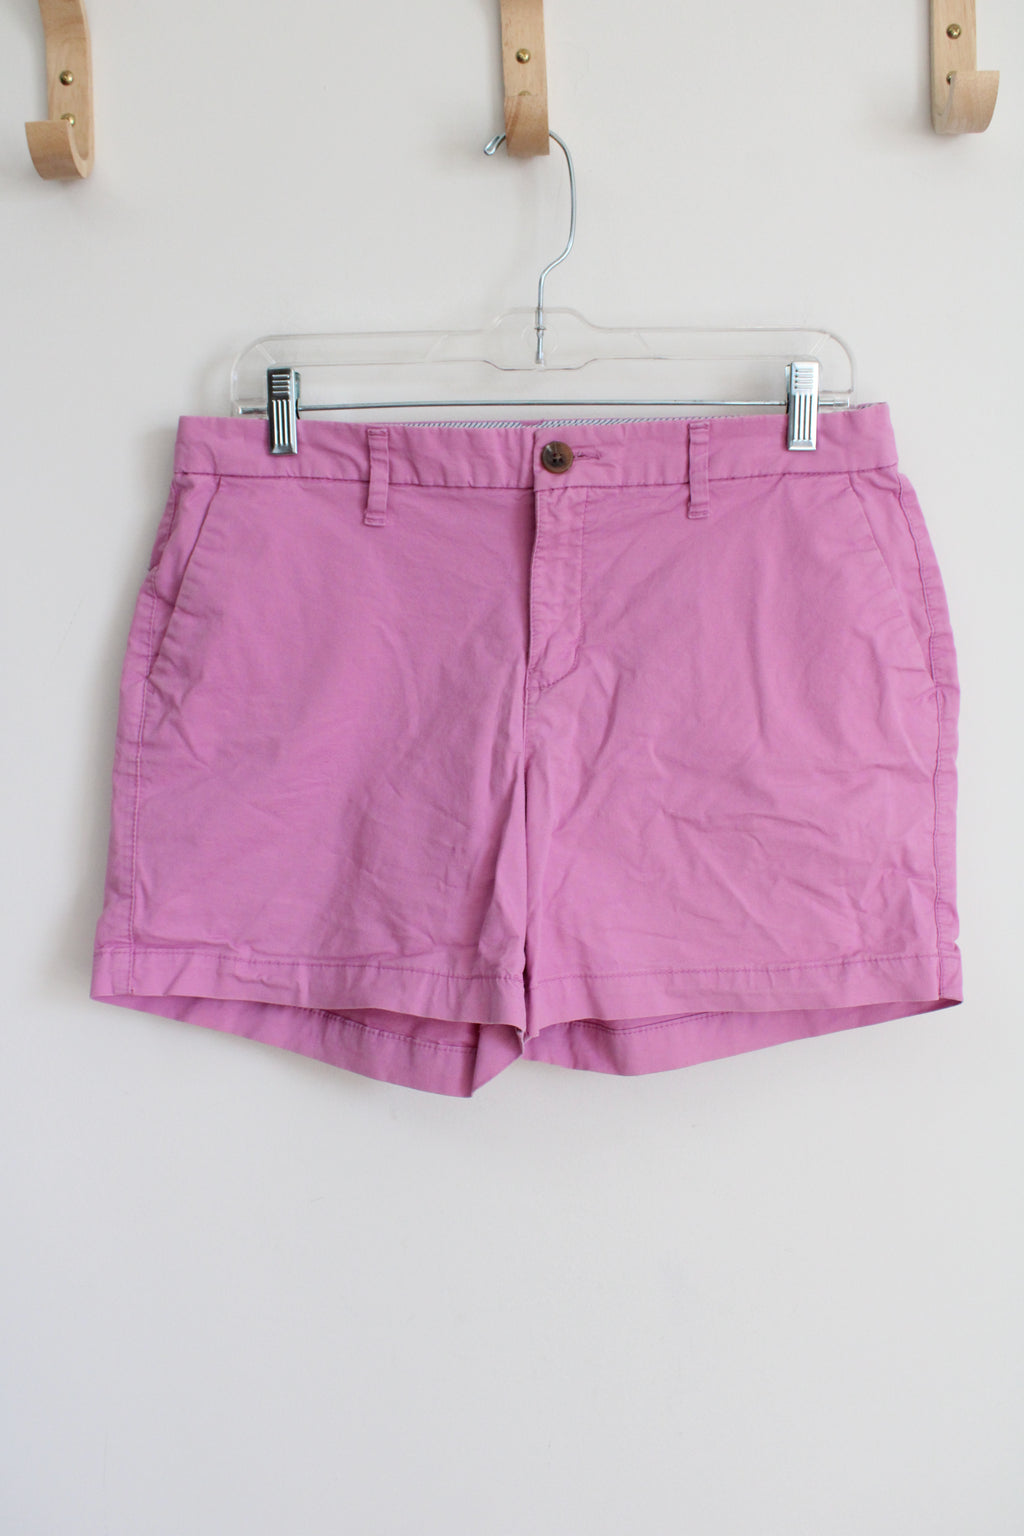 Old Navy Pink Purple Everyday Short | 8